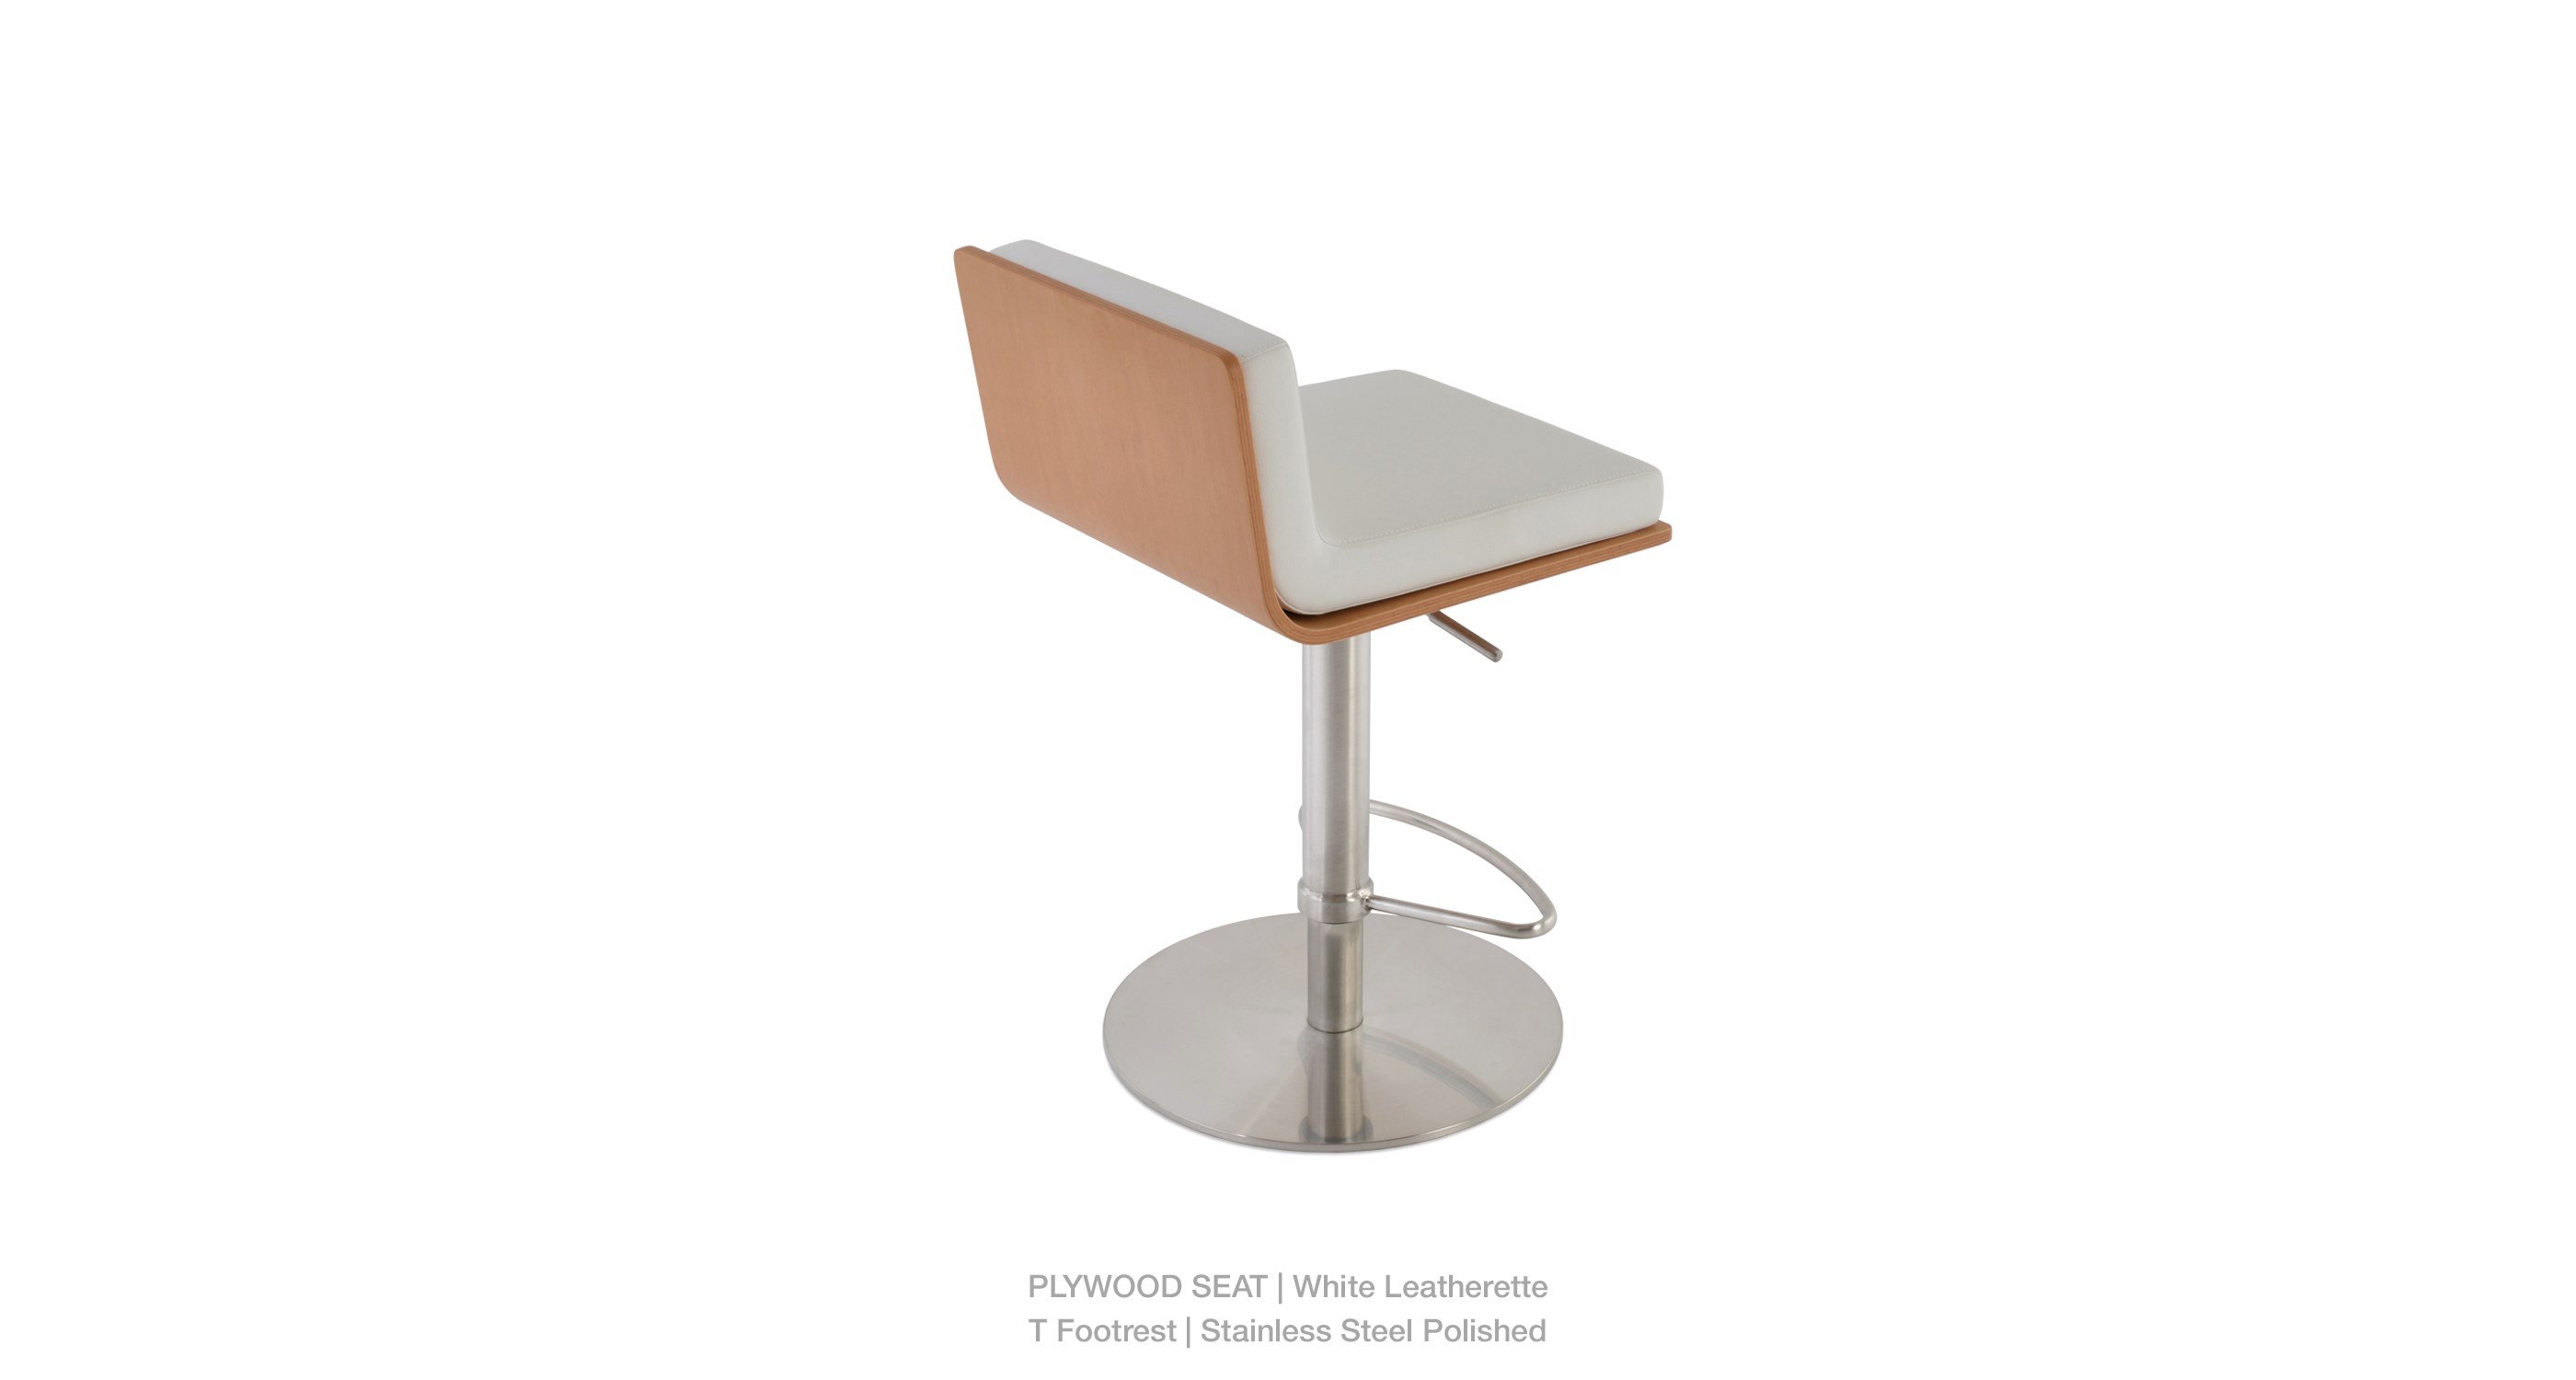 PLYWOOD SEAT - white leatherette